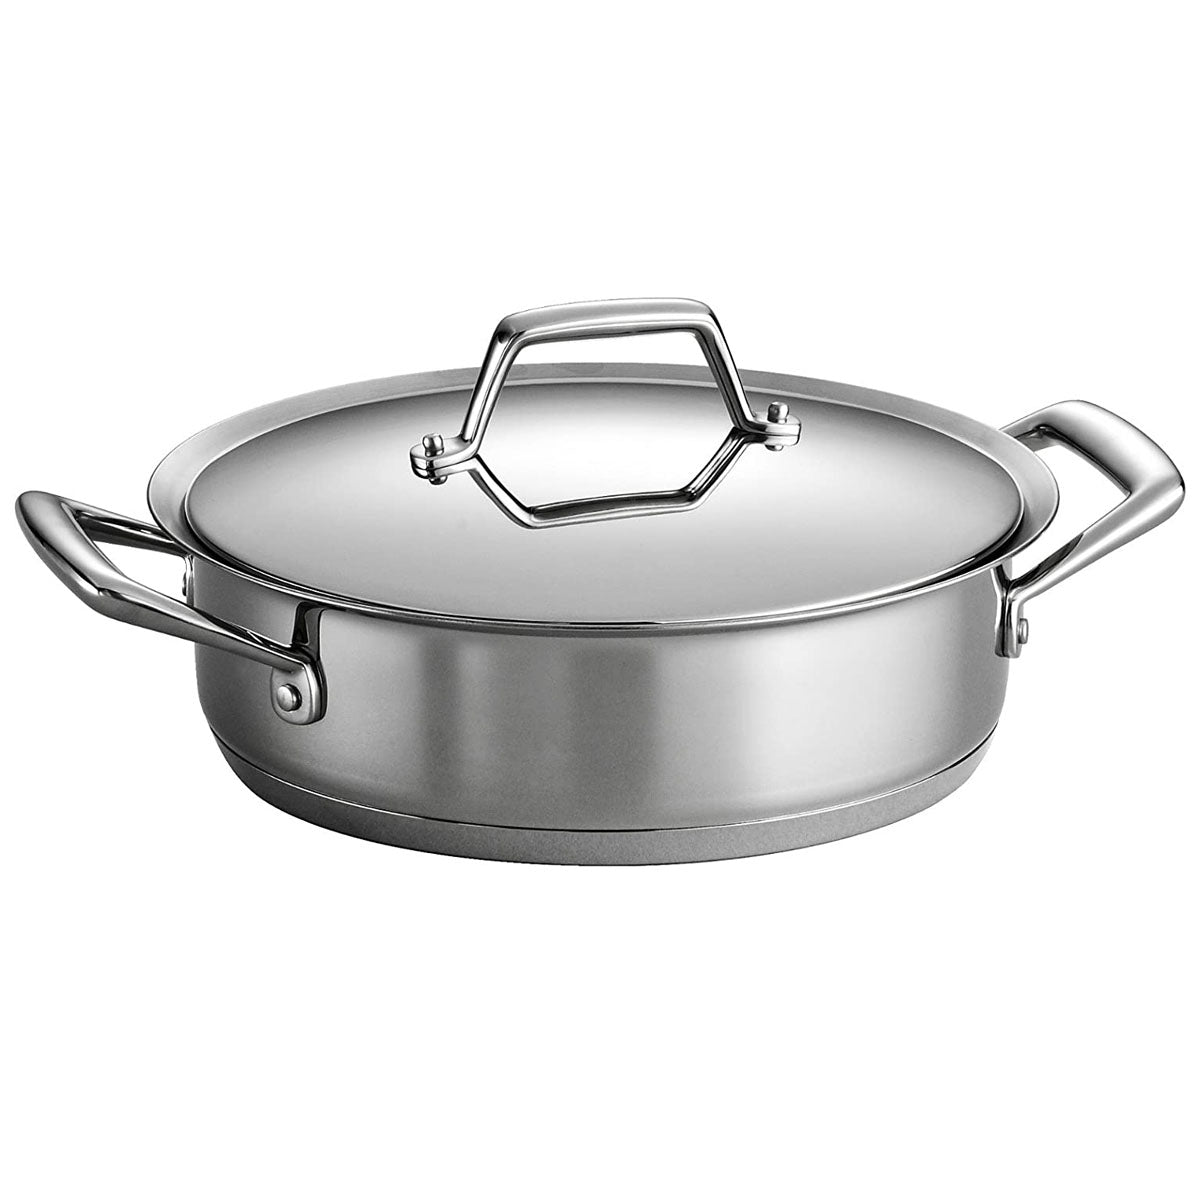 Tramontina Gourmet 3 qt Prima Stainless Steel Covered Casserole